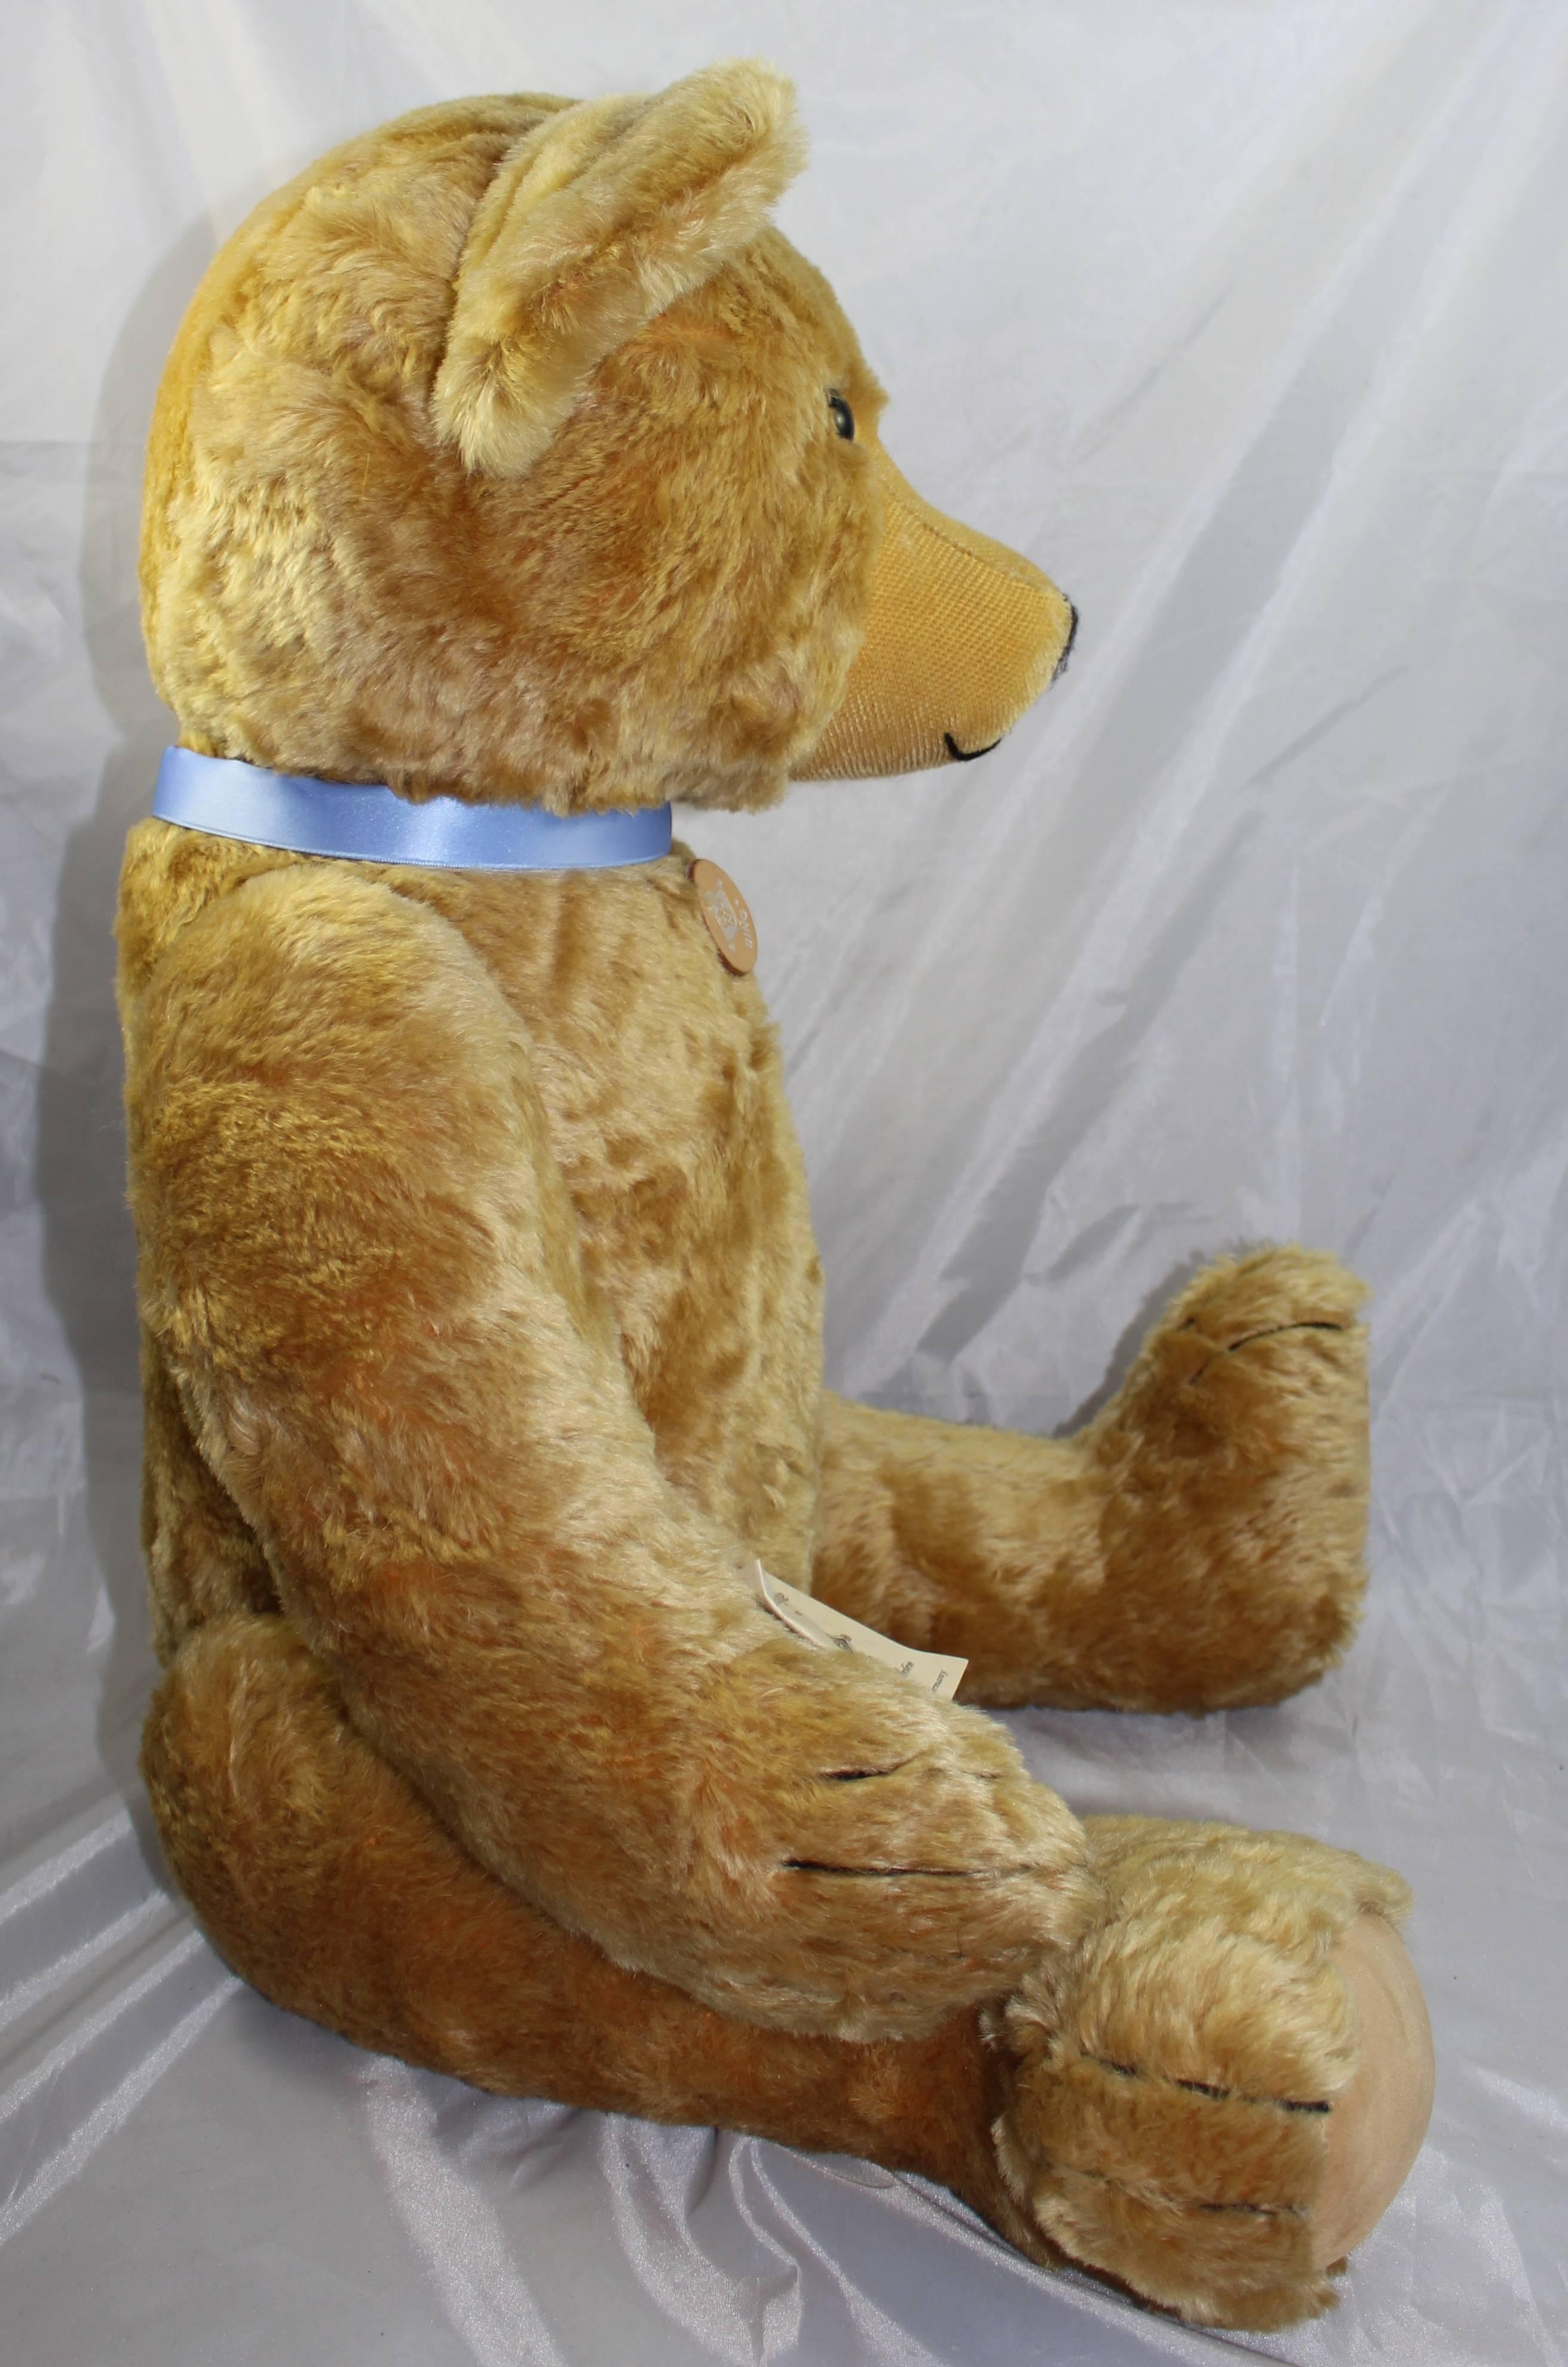 

Manufacturer: Bing.
Origin: Germany.
Height: 76 cm / 30 in.
Limited Edition: 11 of 100.
Condition: Very good condition complete with certificate affixed to body.

Nice quality Bing growler bear.

Very clean bear from a private